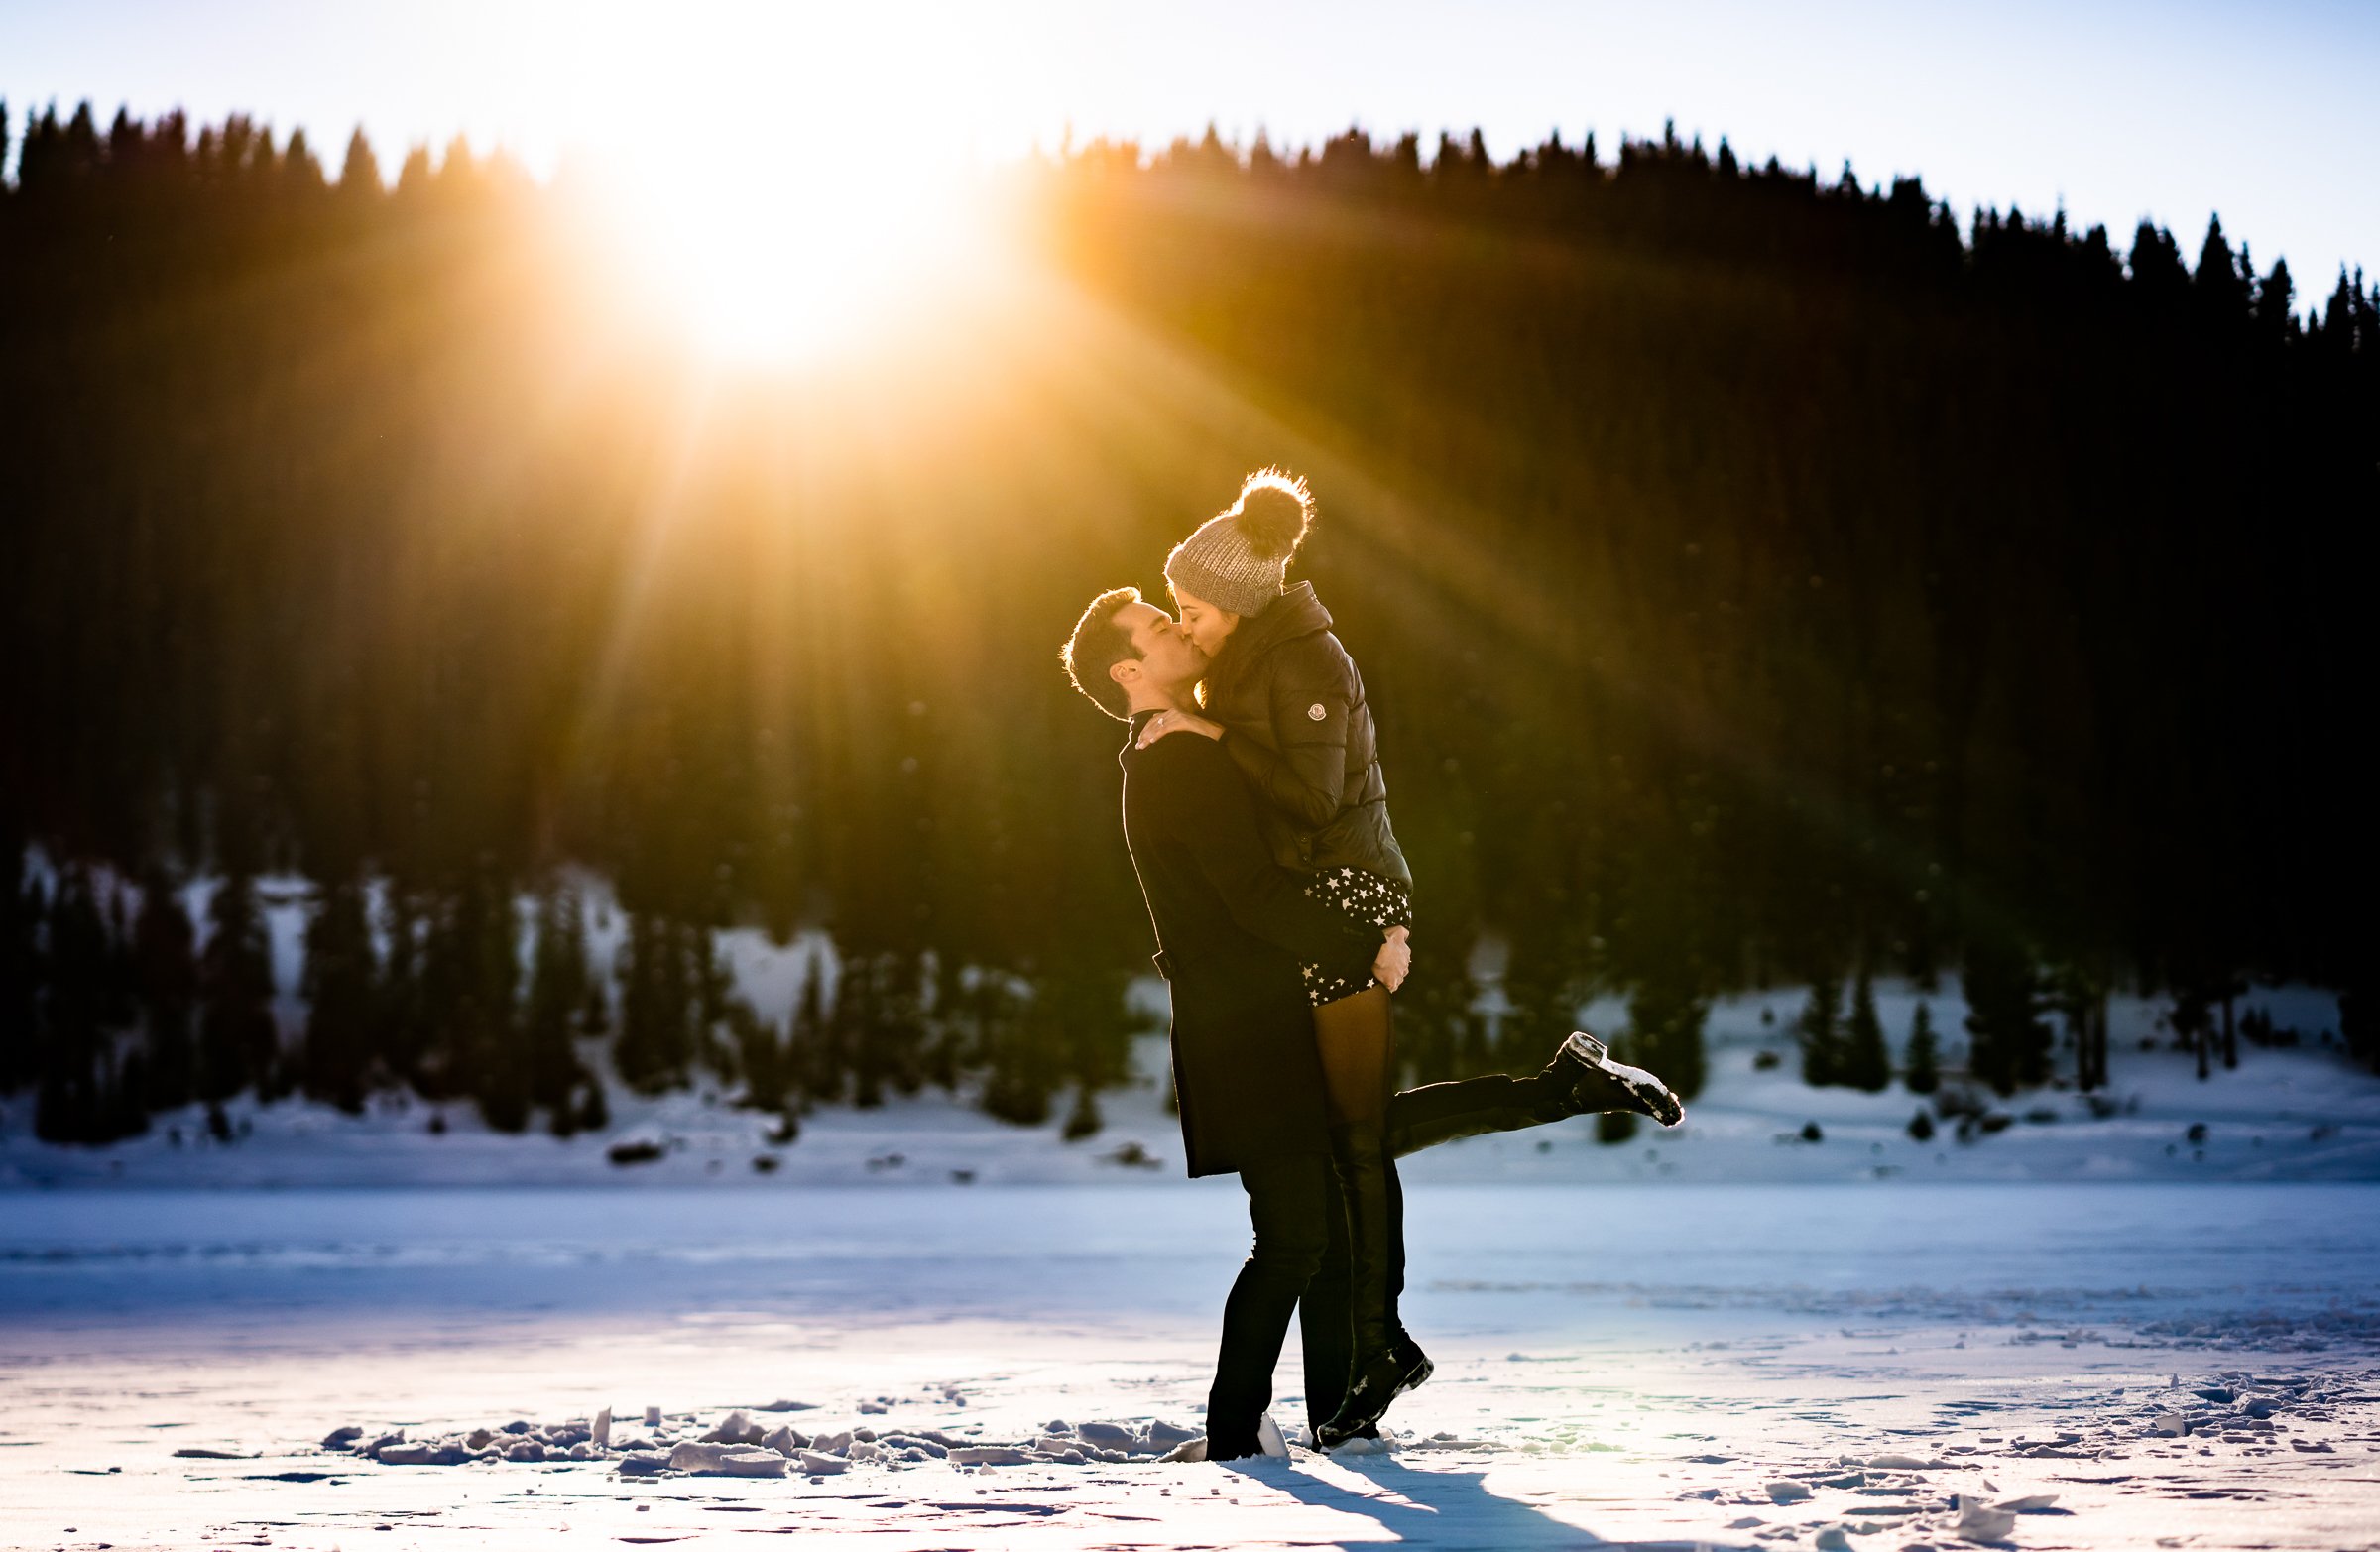 Newly engaged couple celebrate their proposal on a frozen lake with snowcapped mountains in the background, Winter Engagement Session, Winter Engagement Photos, Engagement Photos Inspiration, Engagement Photography, Engagement Photographer, Winter Engagement Photos, Proposal Photos, Proposal Photographer, Proposal Photography, Winter Proposal, Mountain Proposal, Proposal Inspiration, Summit County engagement session, Summit County engagement photos, Summit County engagement photography, Summit County engagement photographer, Summit County engagement inspiration, Colorado engagement session, Colorado engagement photos, Colorado engagement photography, Colorado engagement photographer, Colorado engagement inspiration, Clinton Gulch Engagement